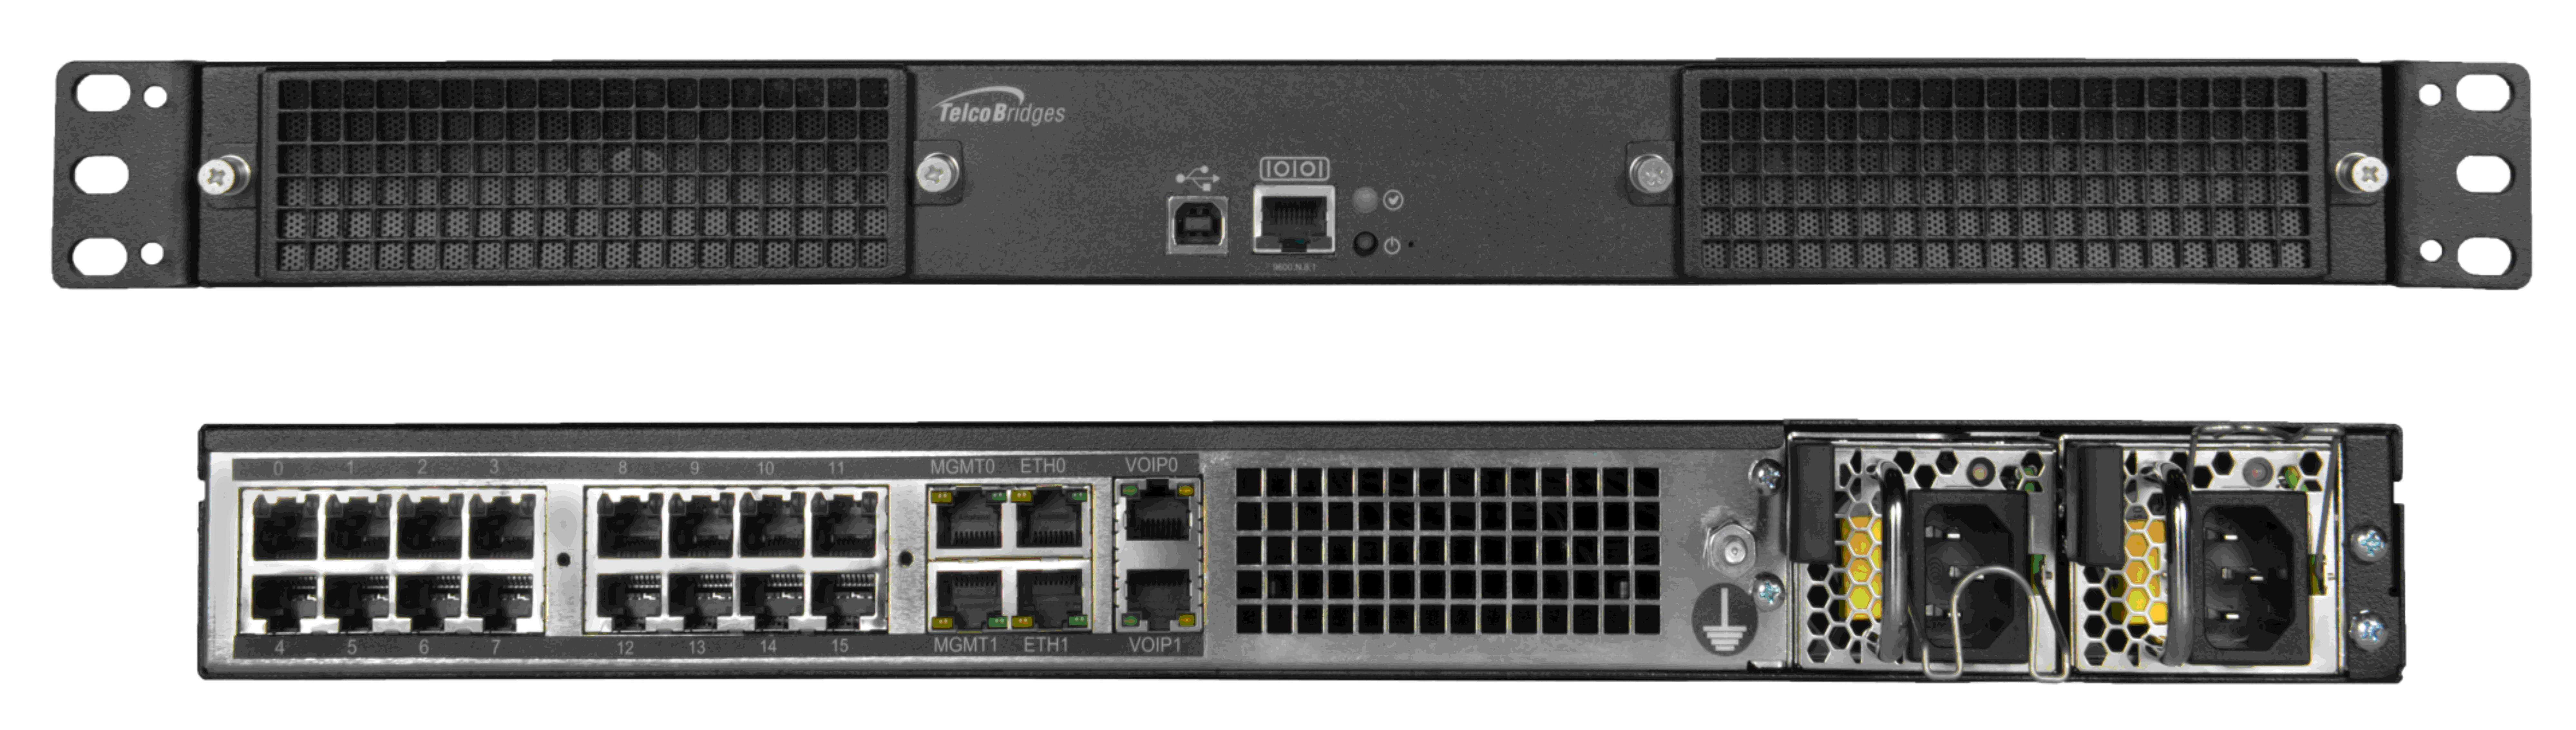 TMG800 Front and Back - Telcobridges